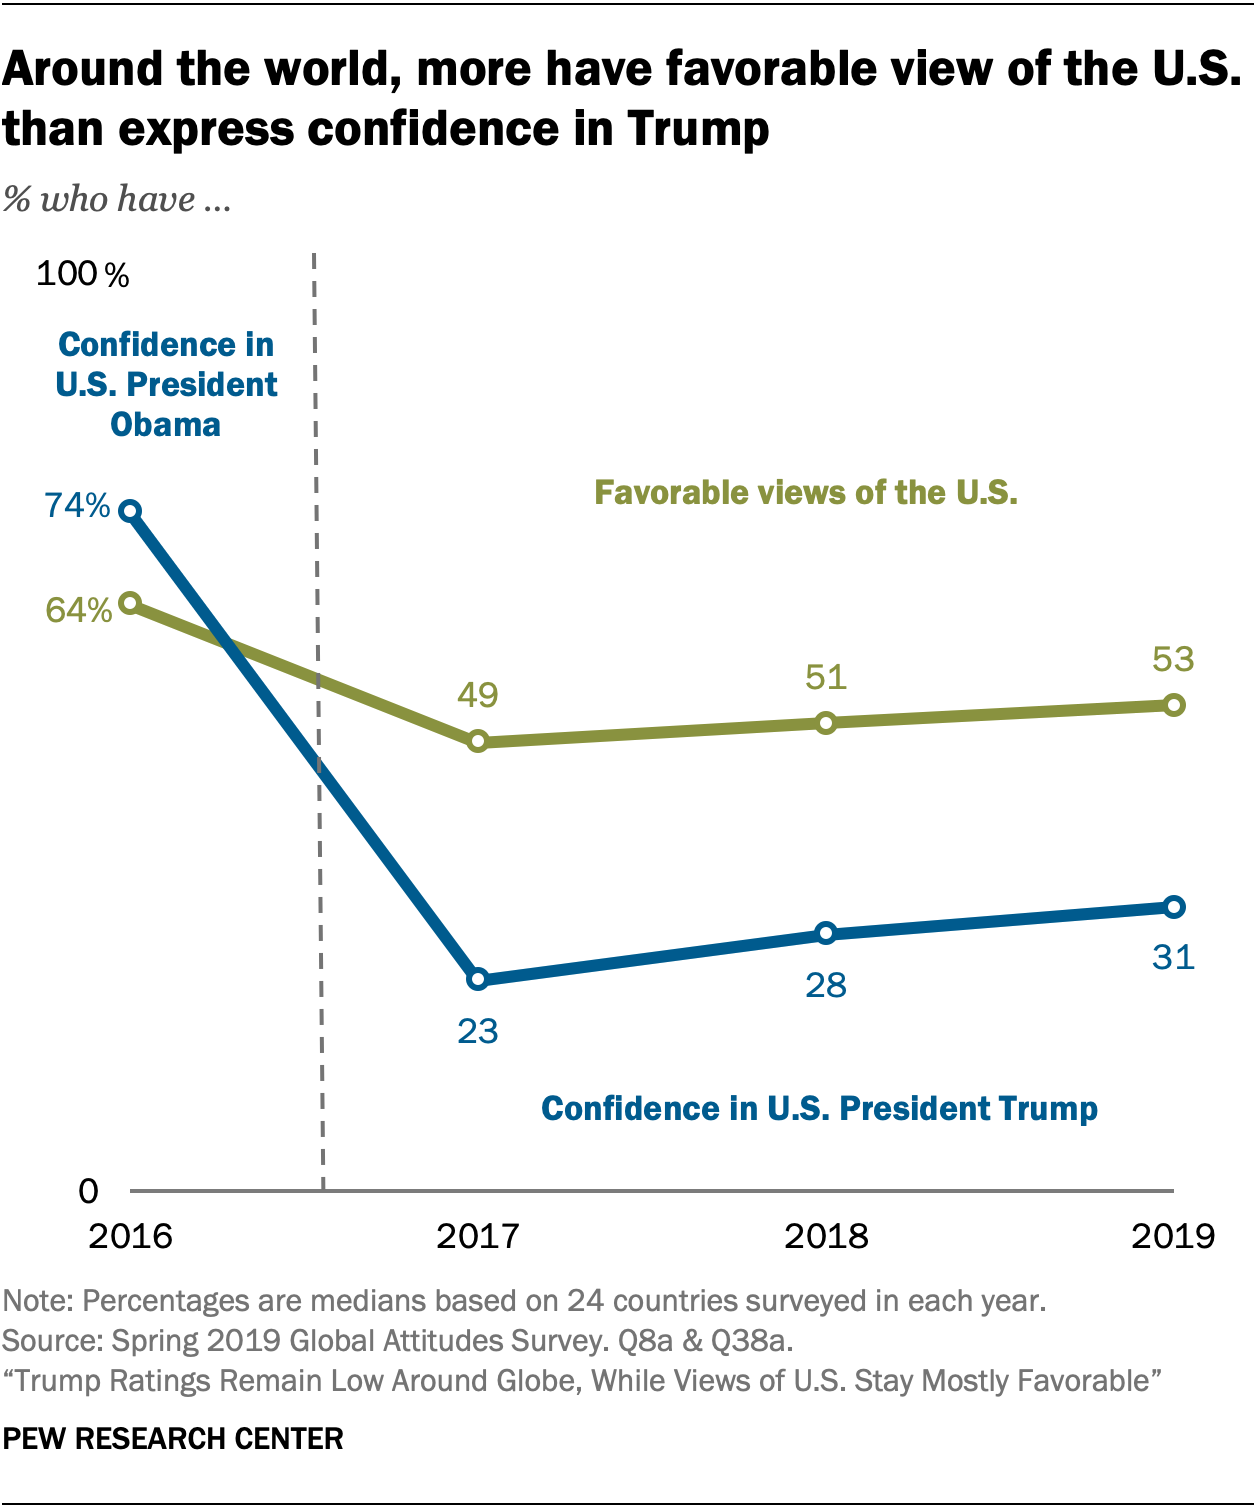 Around the world, more have favorable view of the U.S. than express confidence in Trump